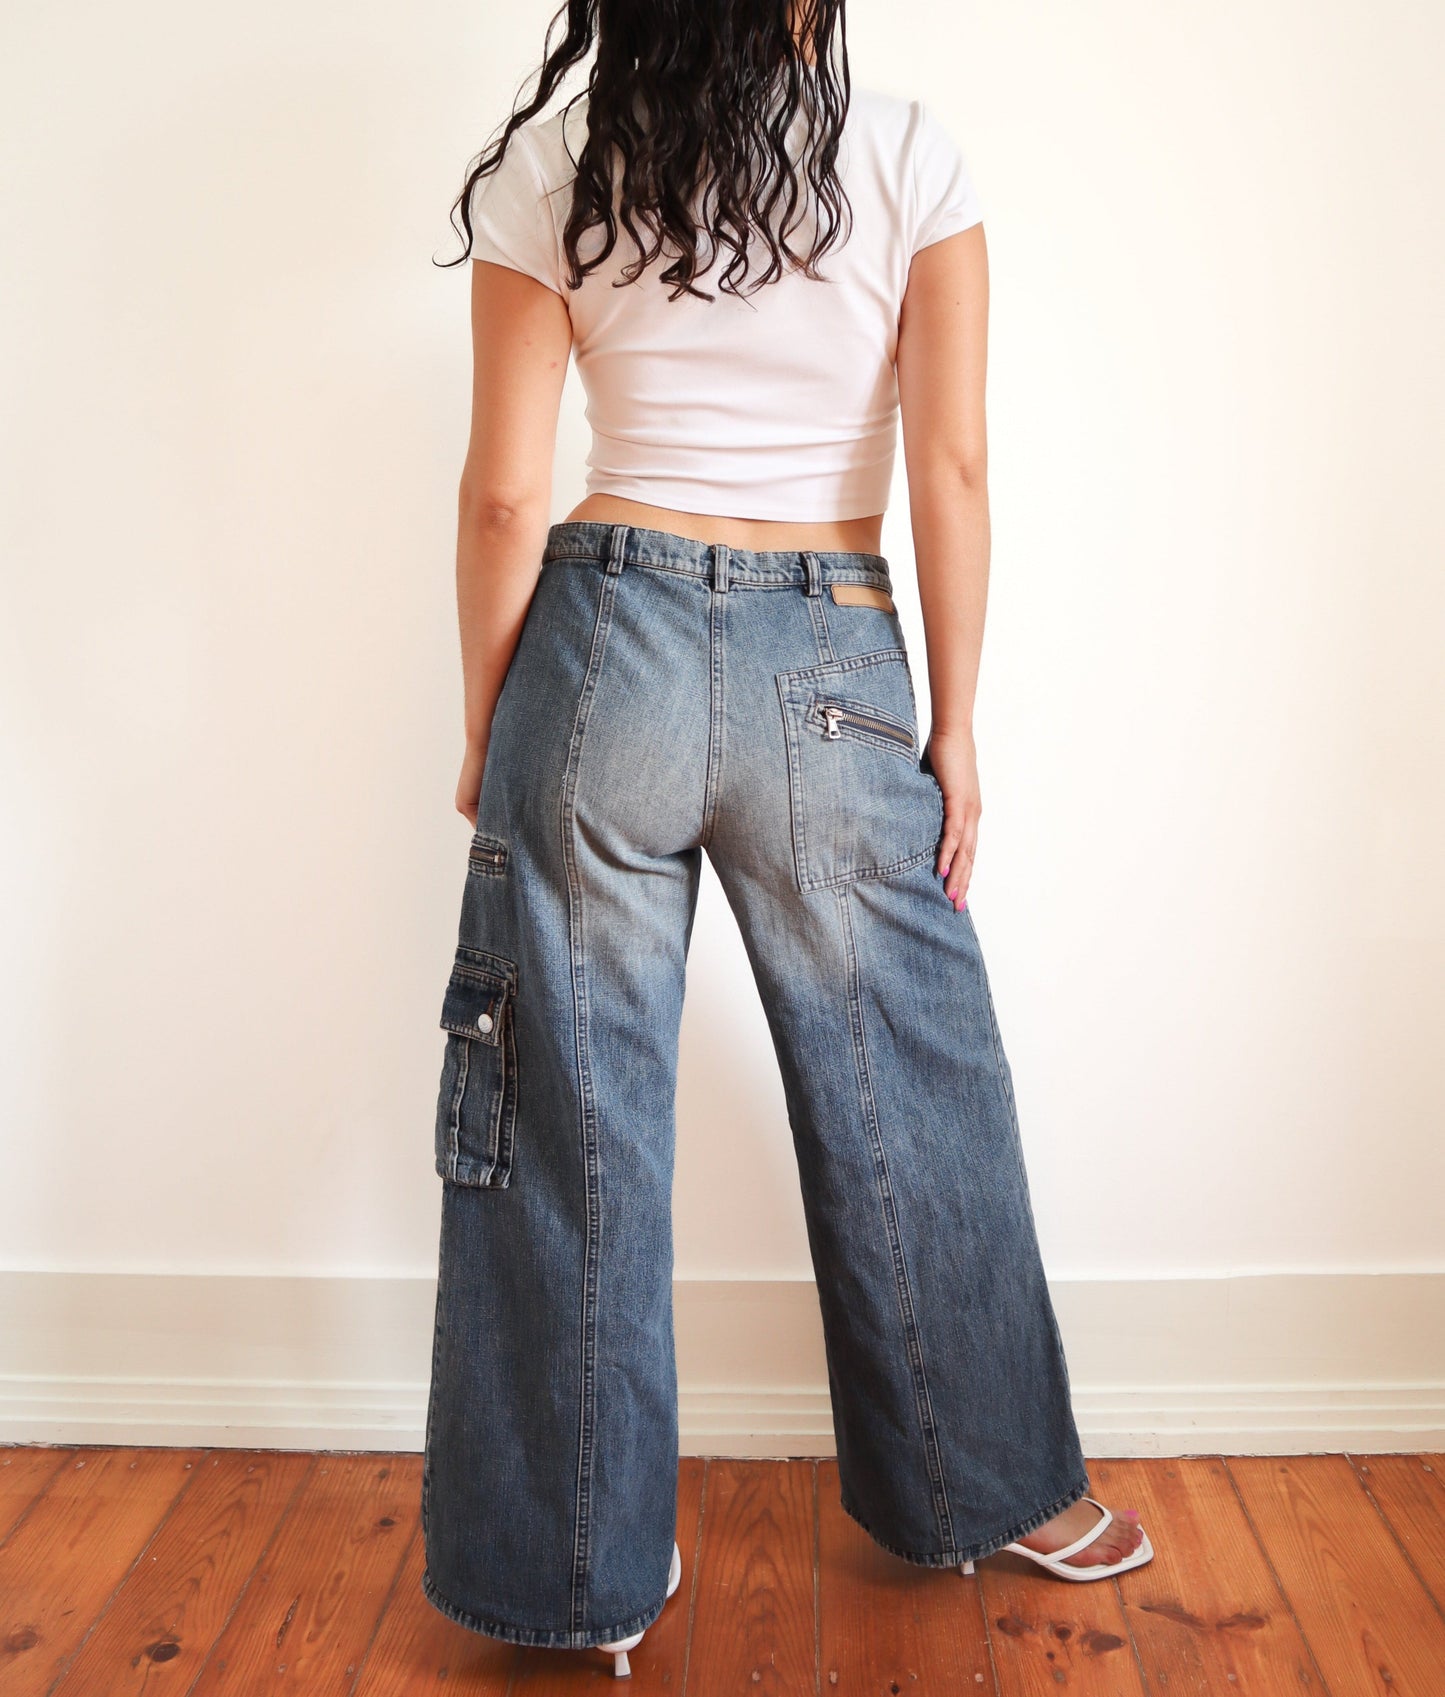 Max&Co jeans